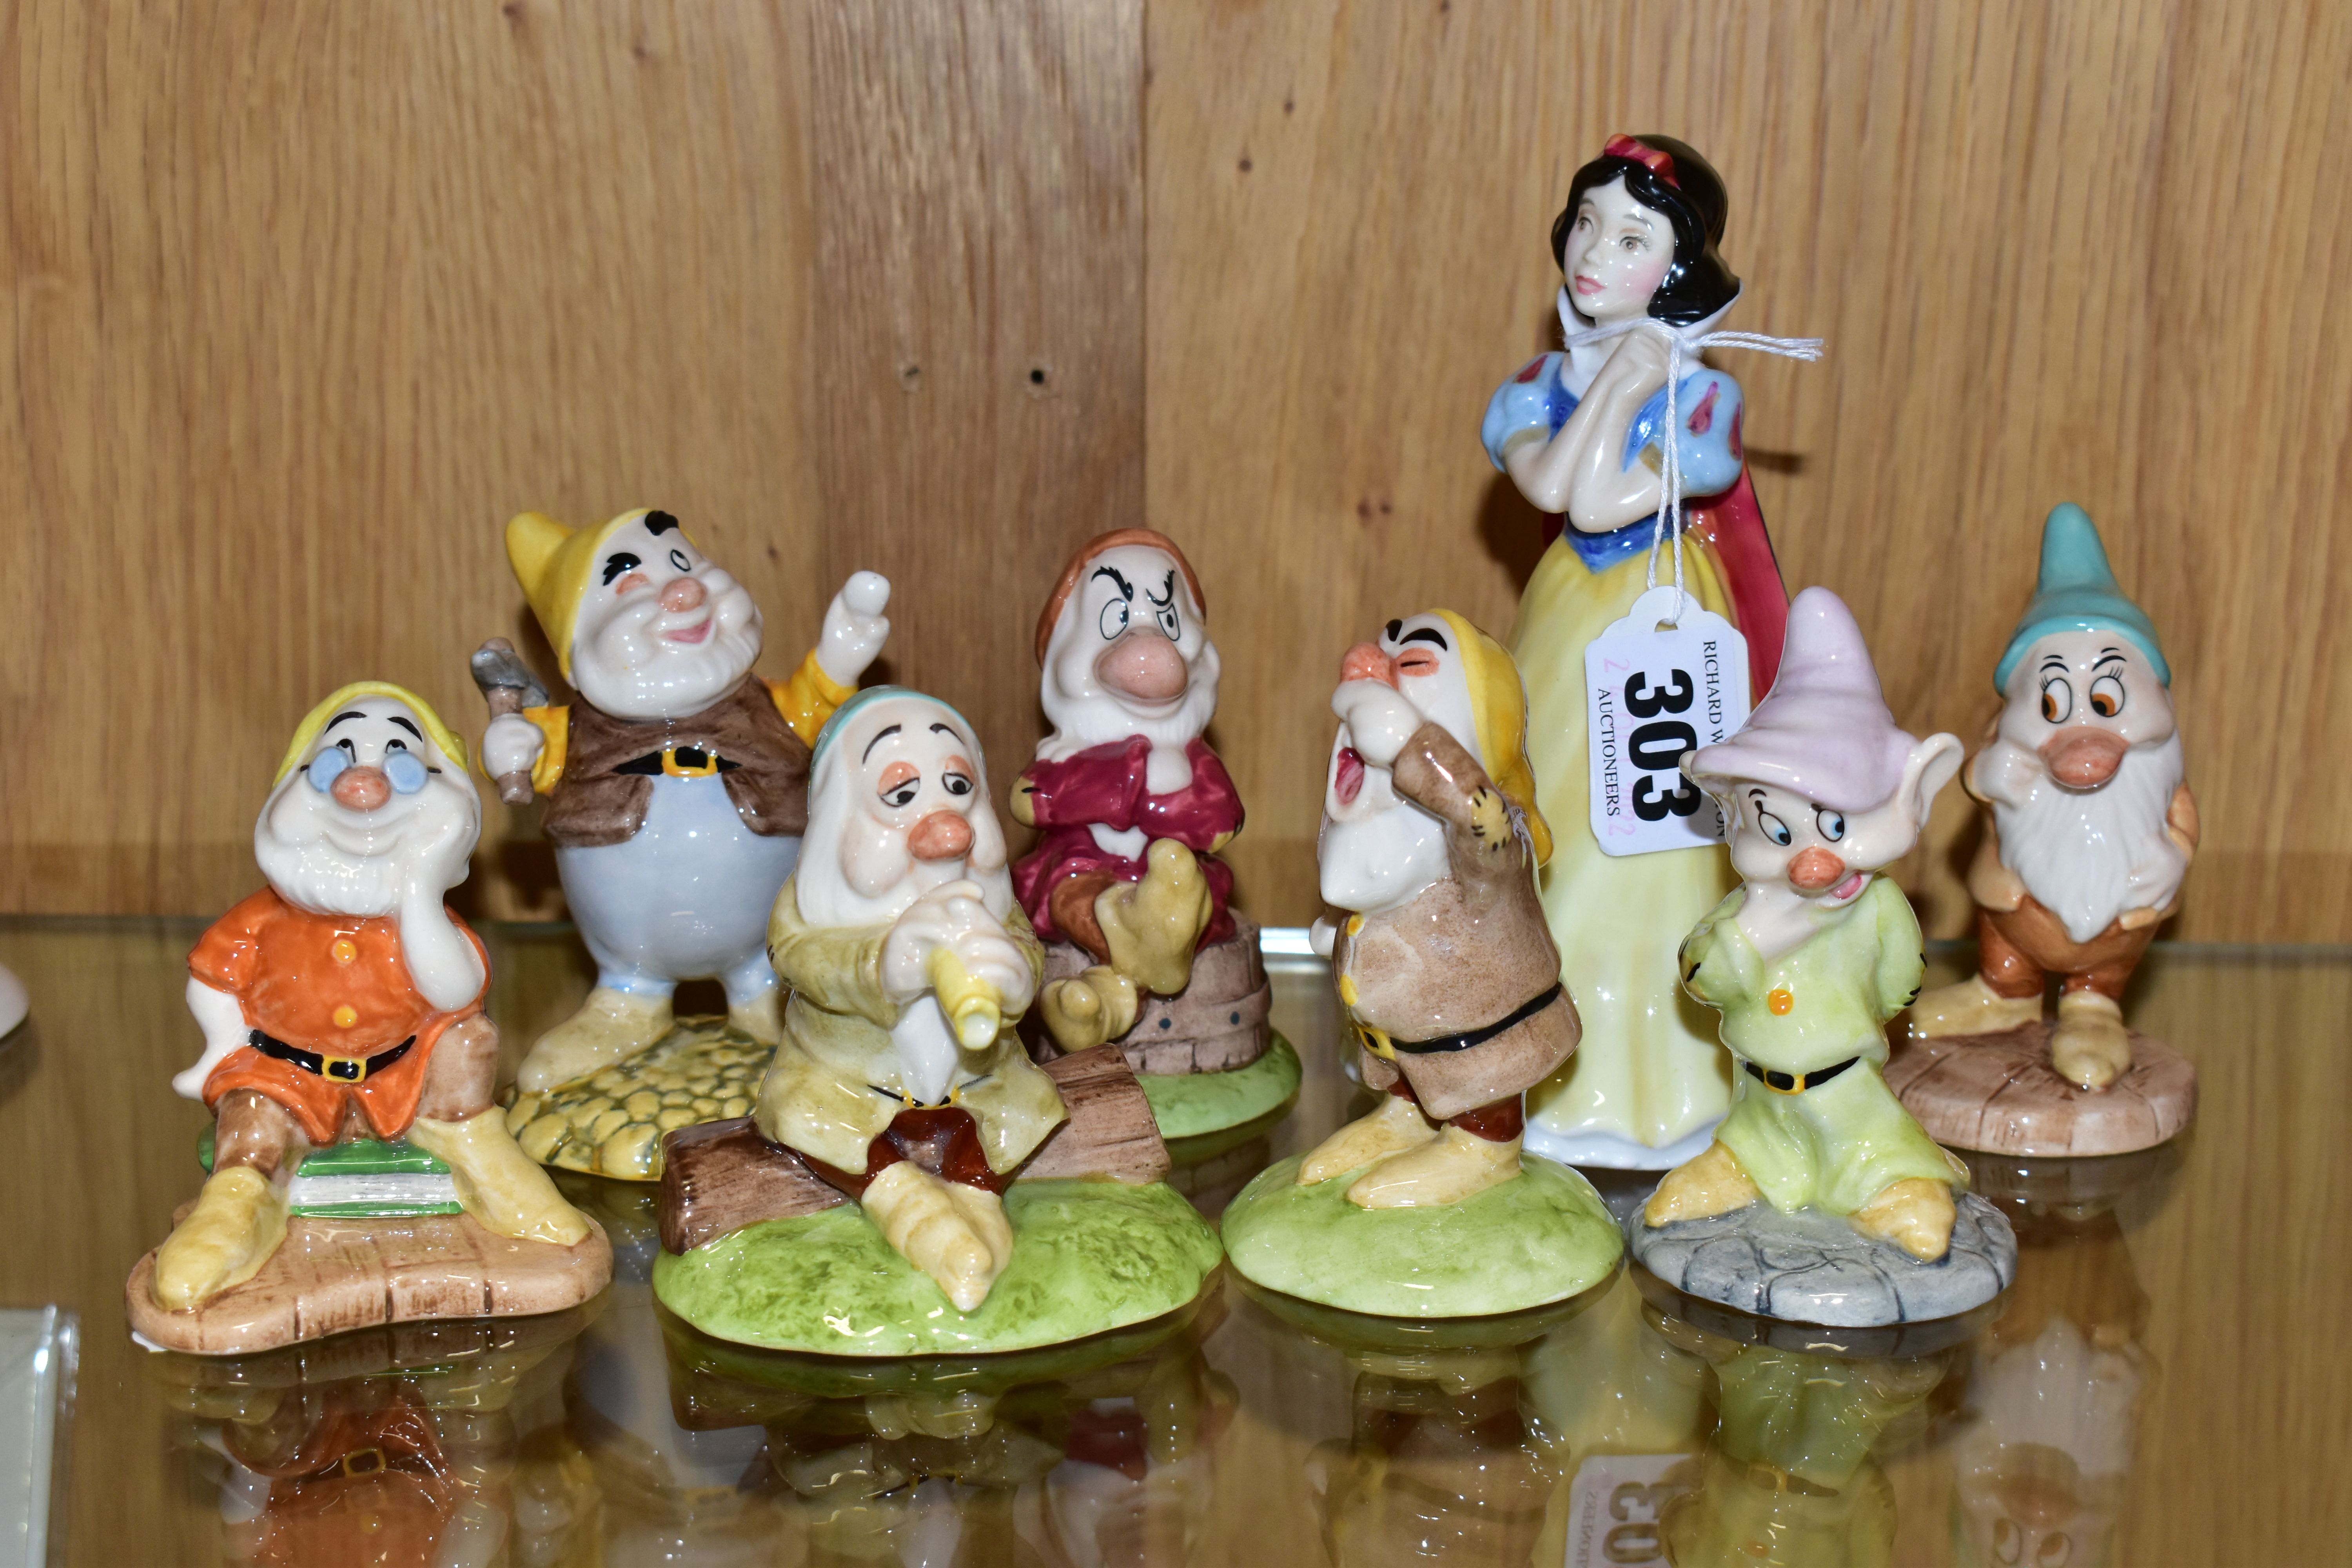 EIGHT BOXED ROYAL DOULTON FIGURES FROM SNOW WHITE AND THE SEVEN DWARFS, comprising Snow White SW9,